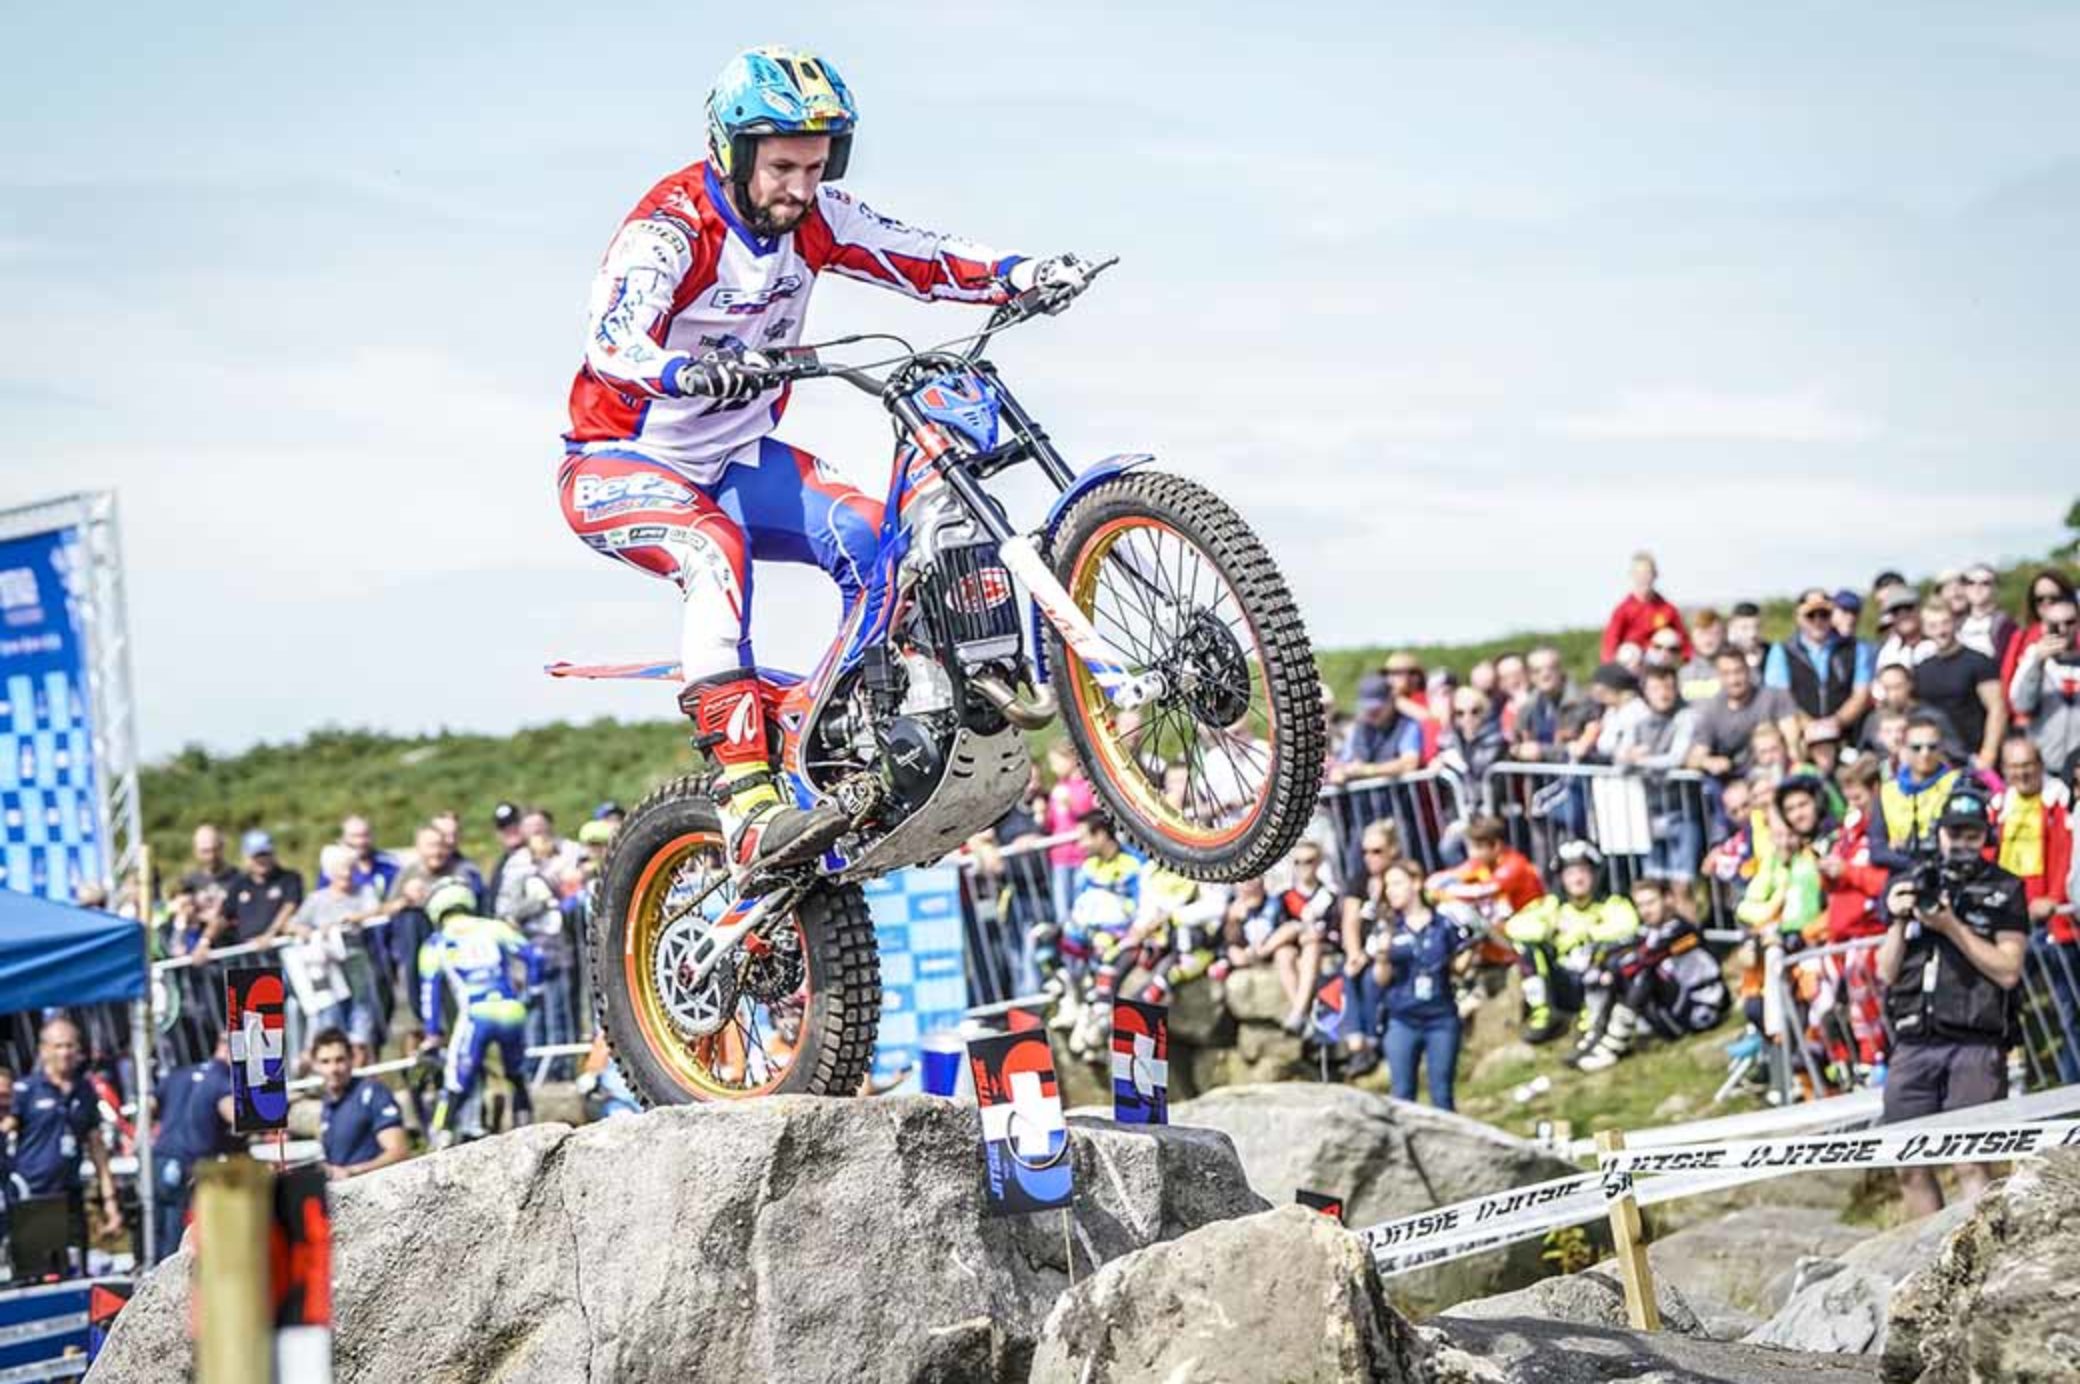 Toni Bou fastest in qualifying at TrialGP Great Britain